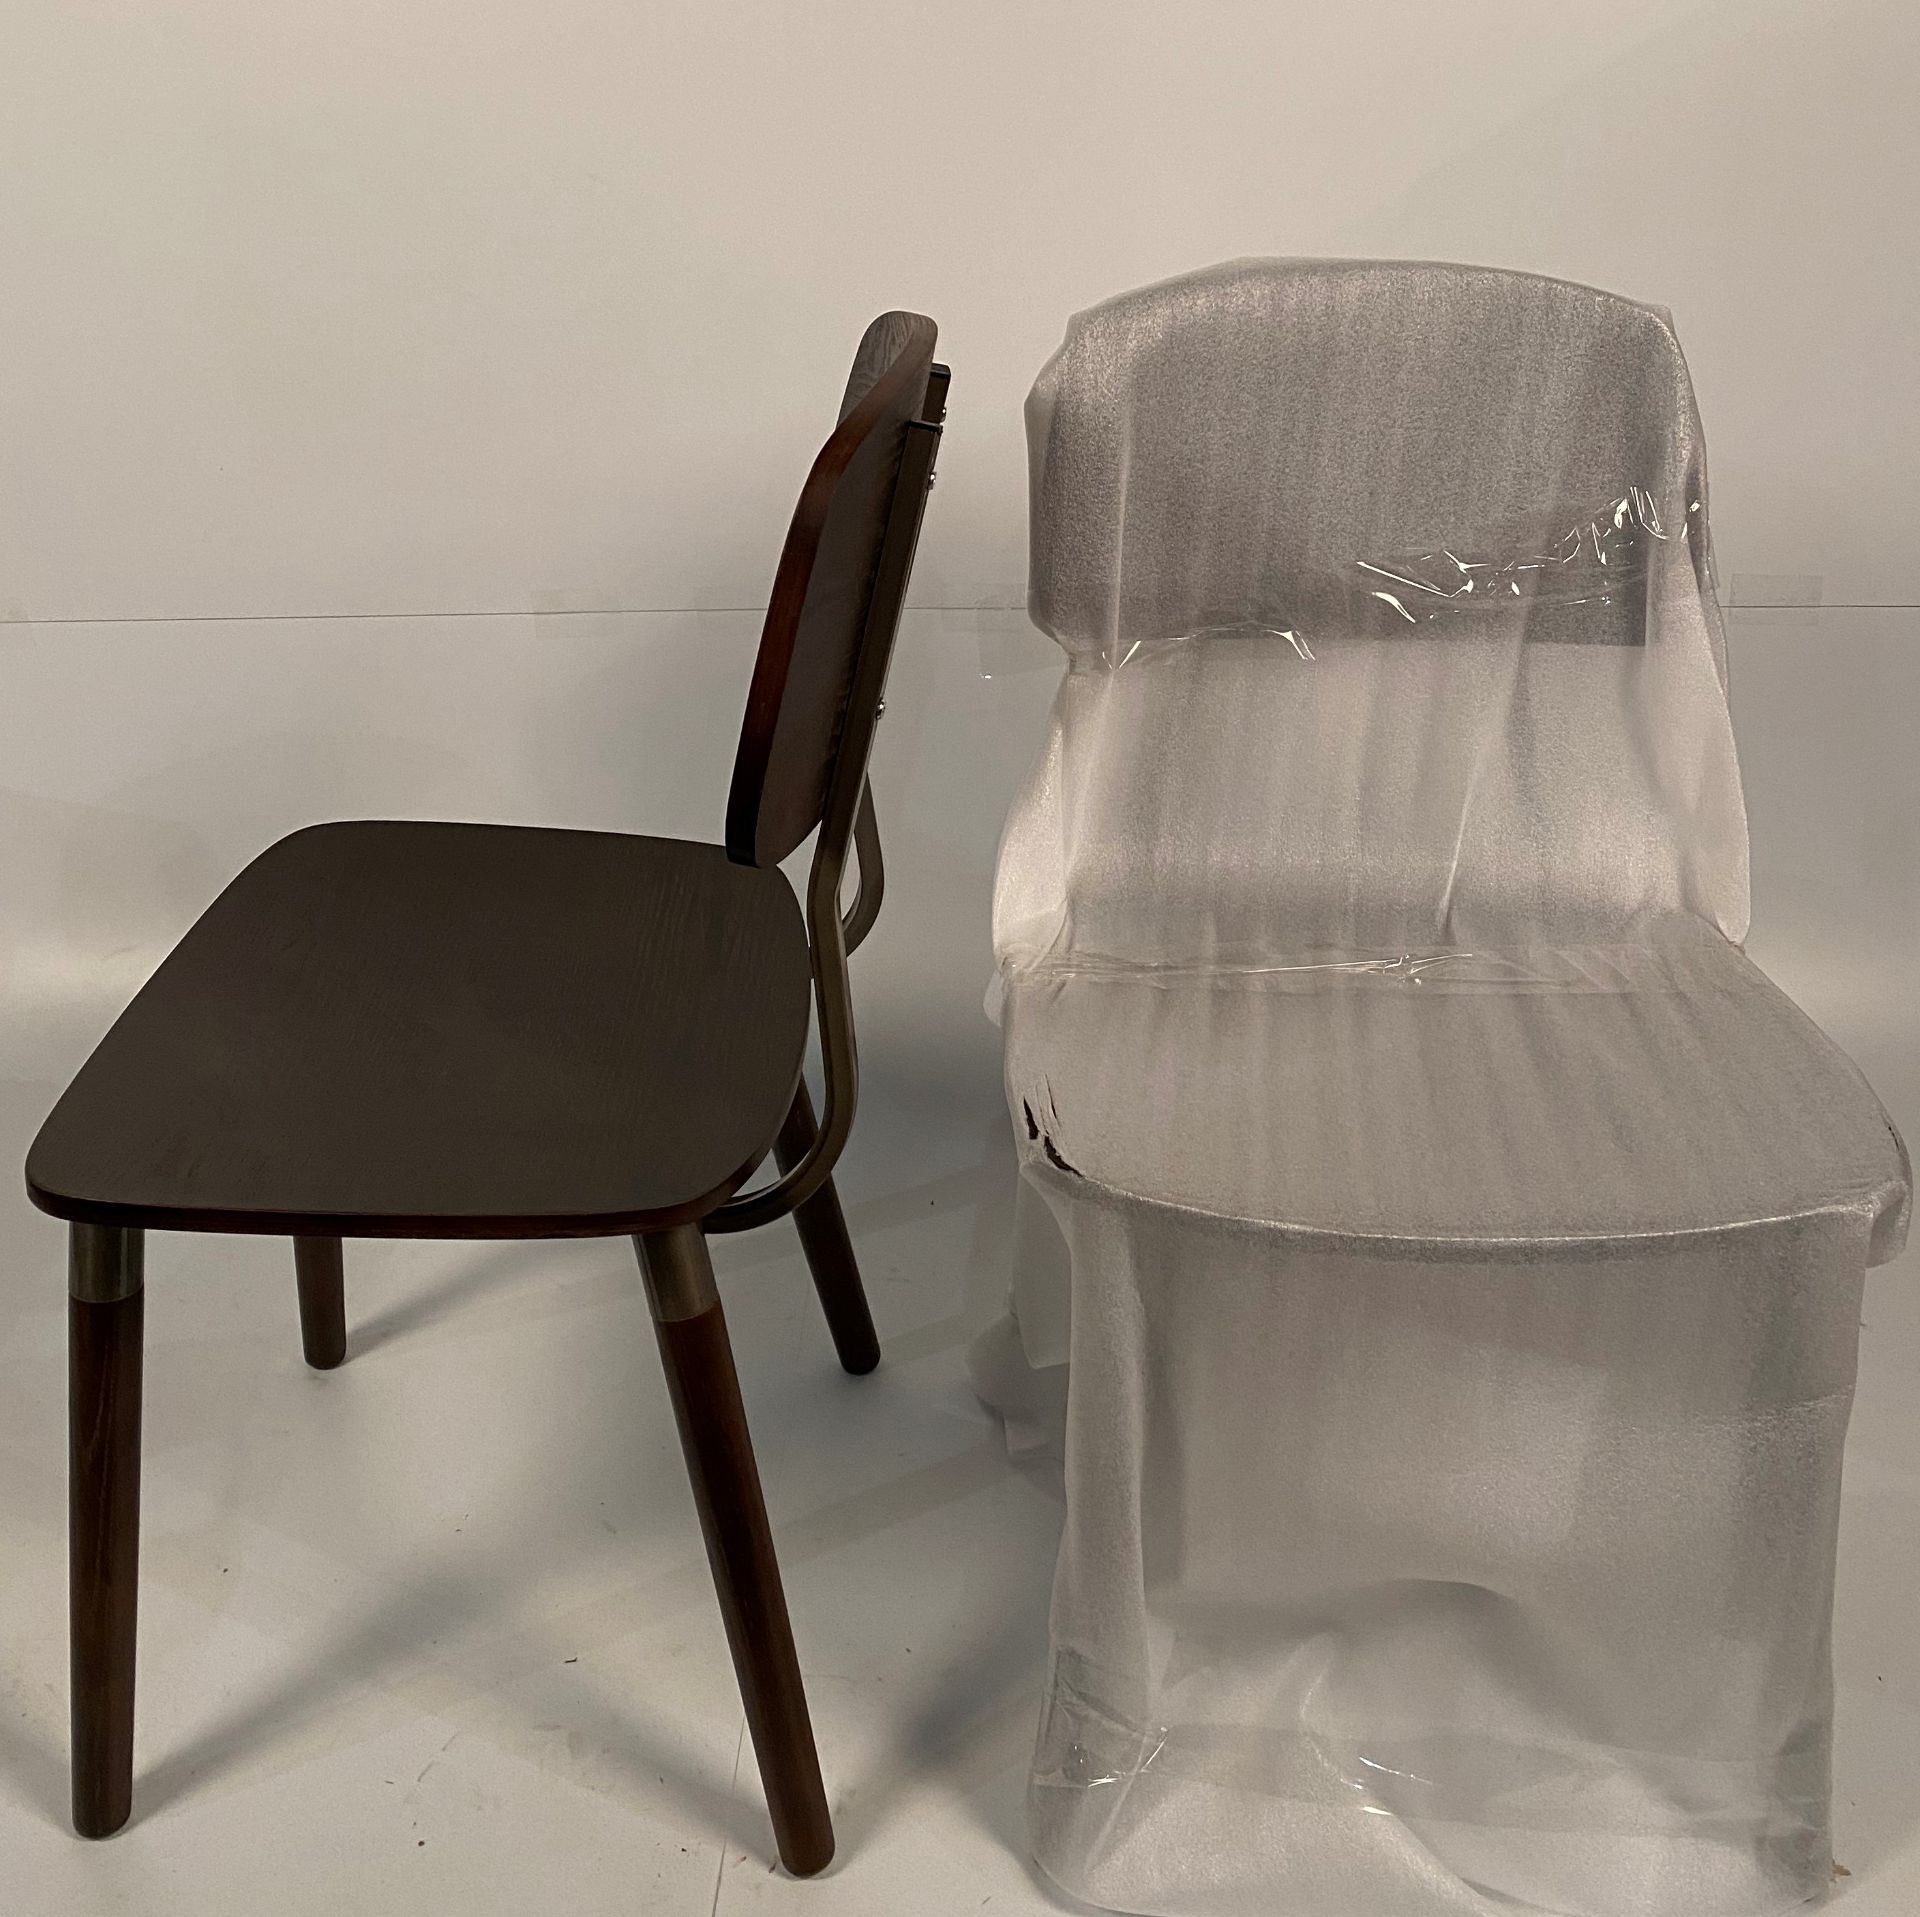 2 x Dart wooden chairs - Image 2 of 4